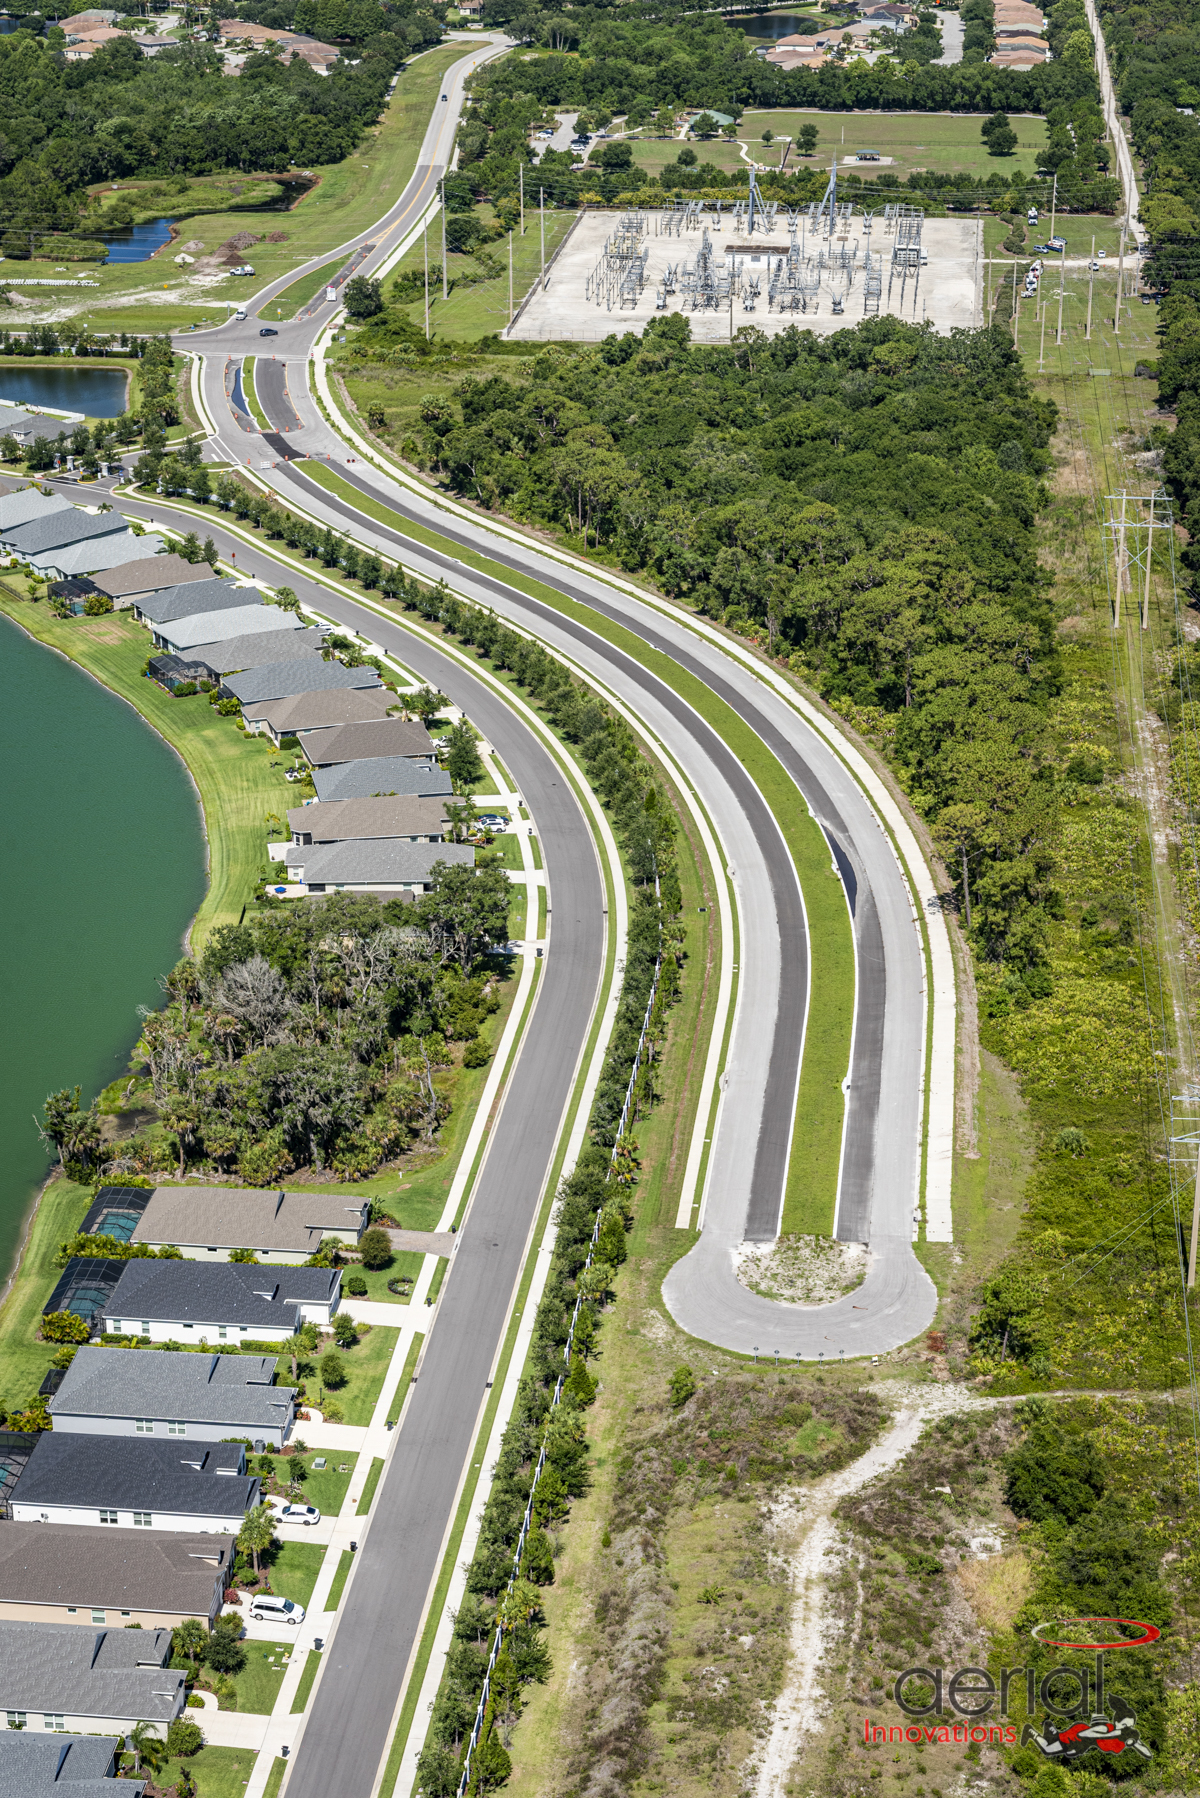 Construction work on the eastern end of Project 5, which is a quarter-mile west of Interstate-75 is largely complete. (Courtesy of Manatee County)